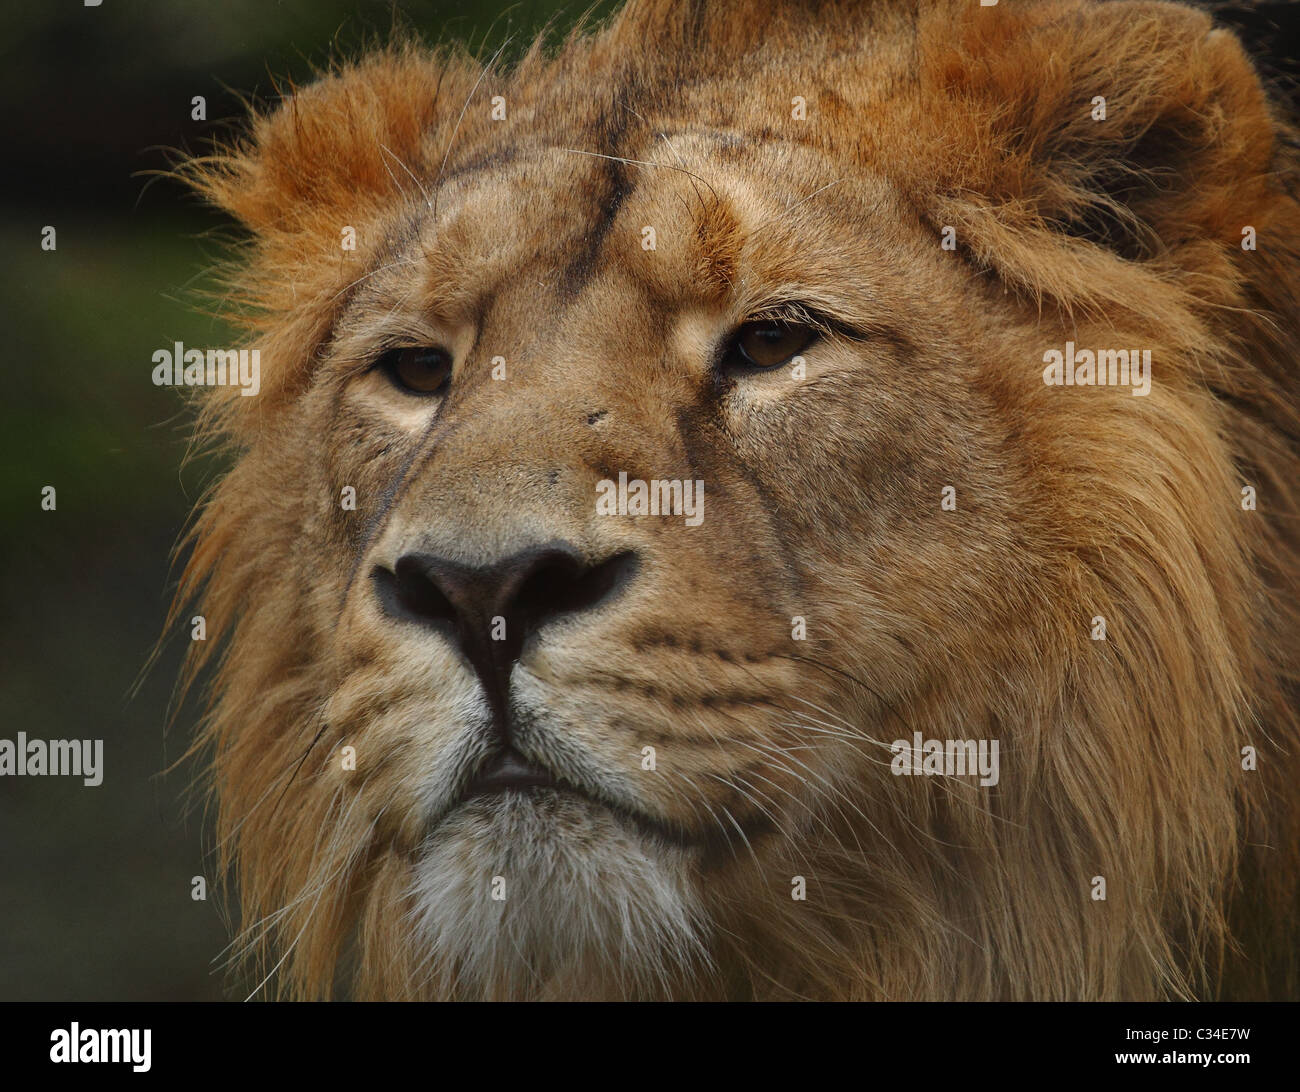 close up of lion head and mane Stock Photo